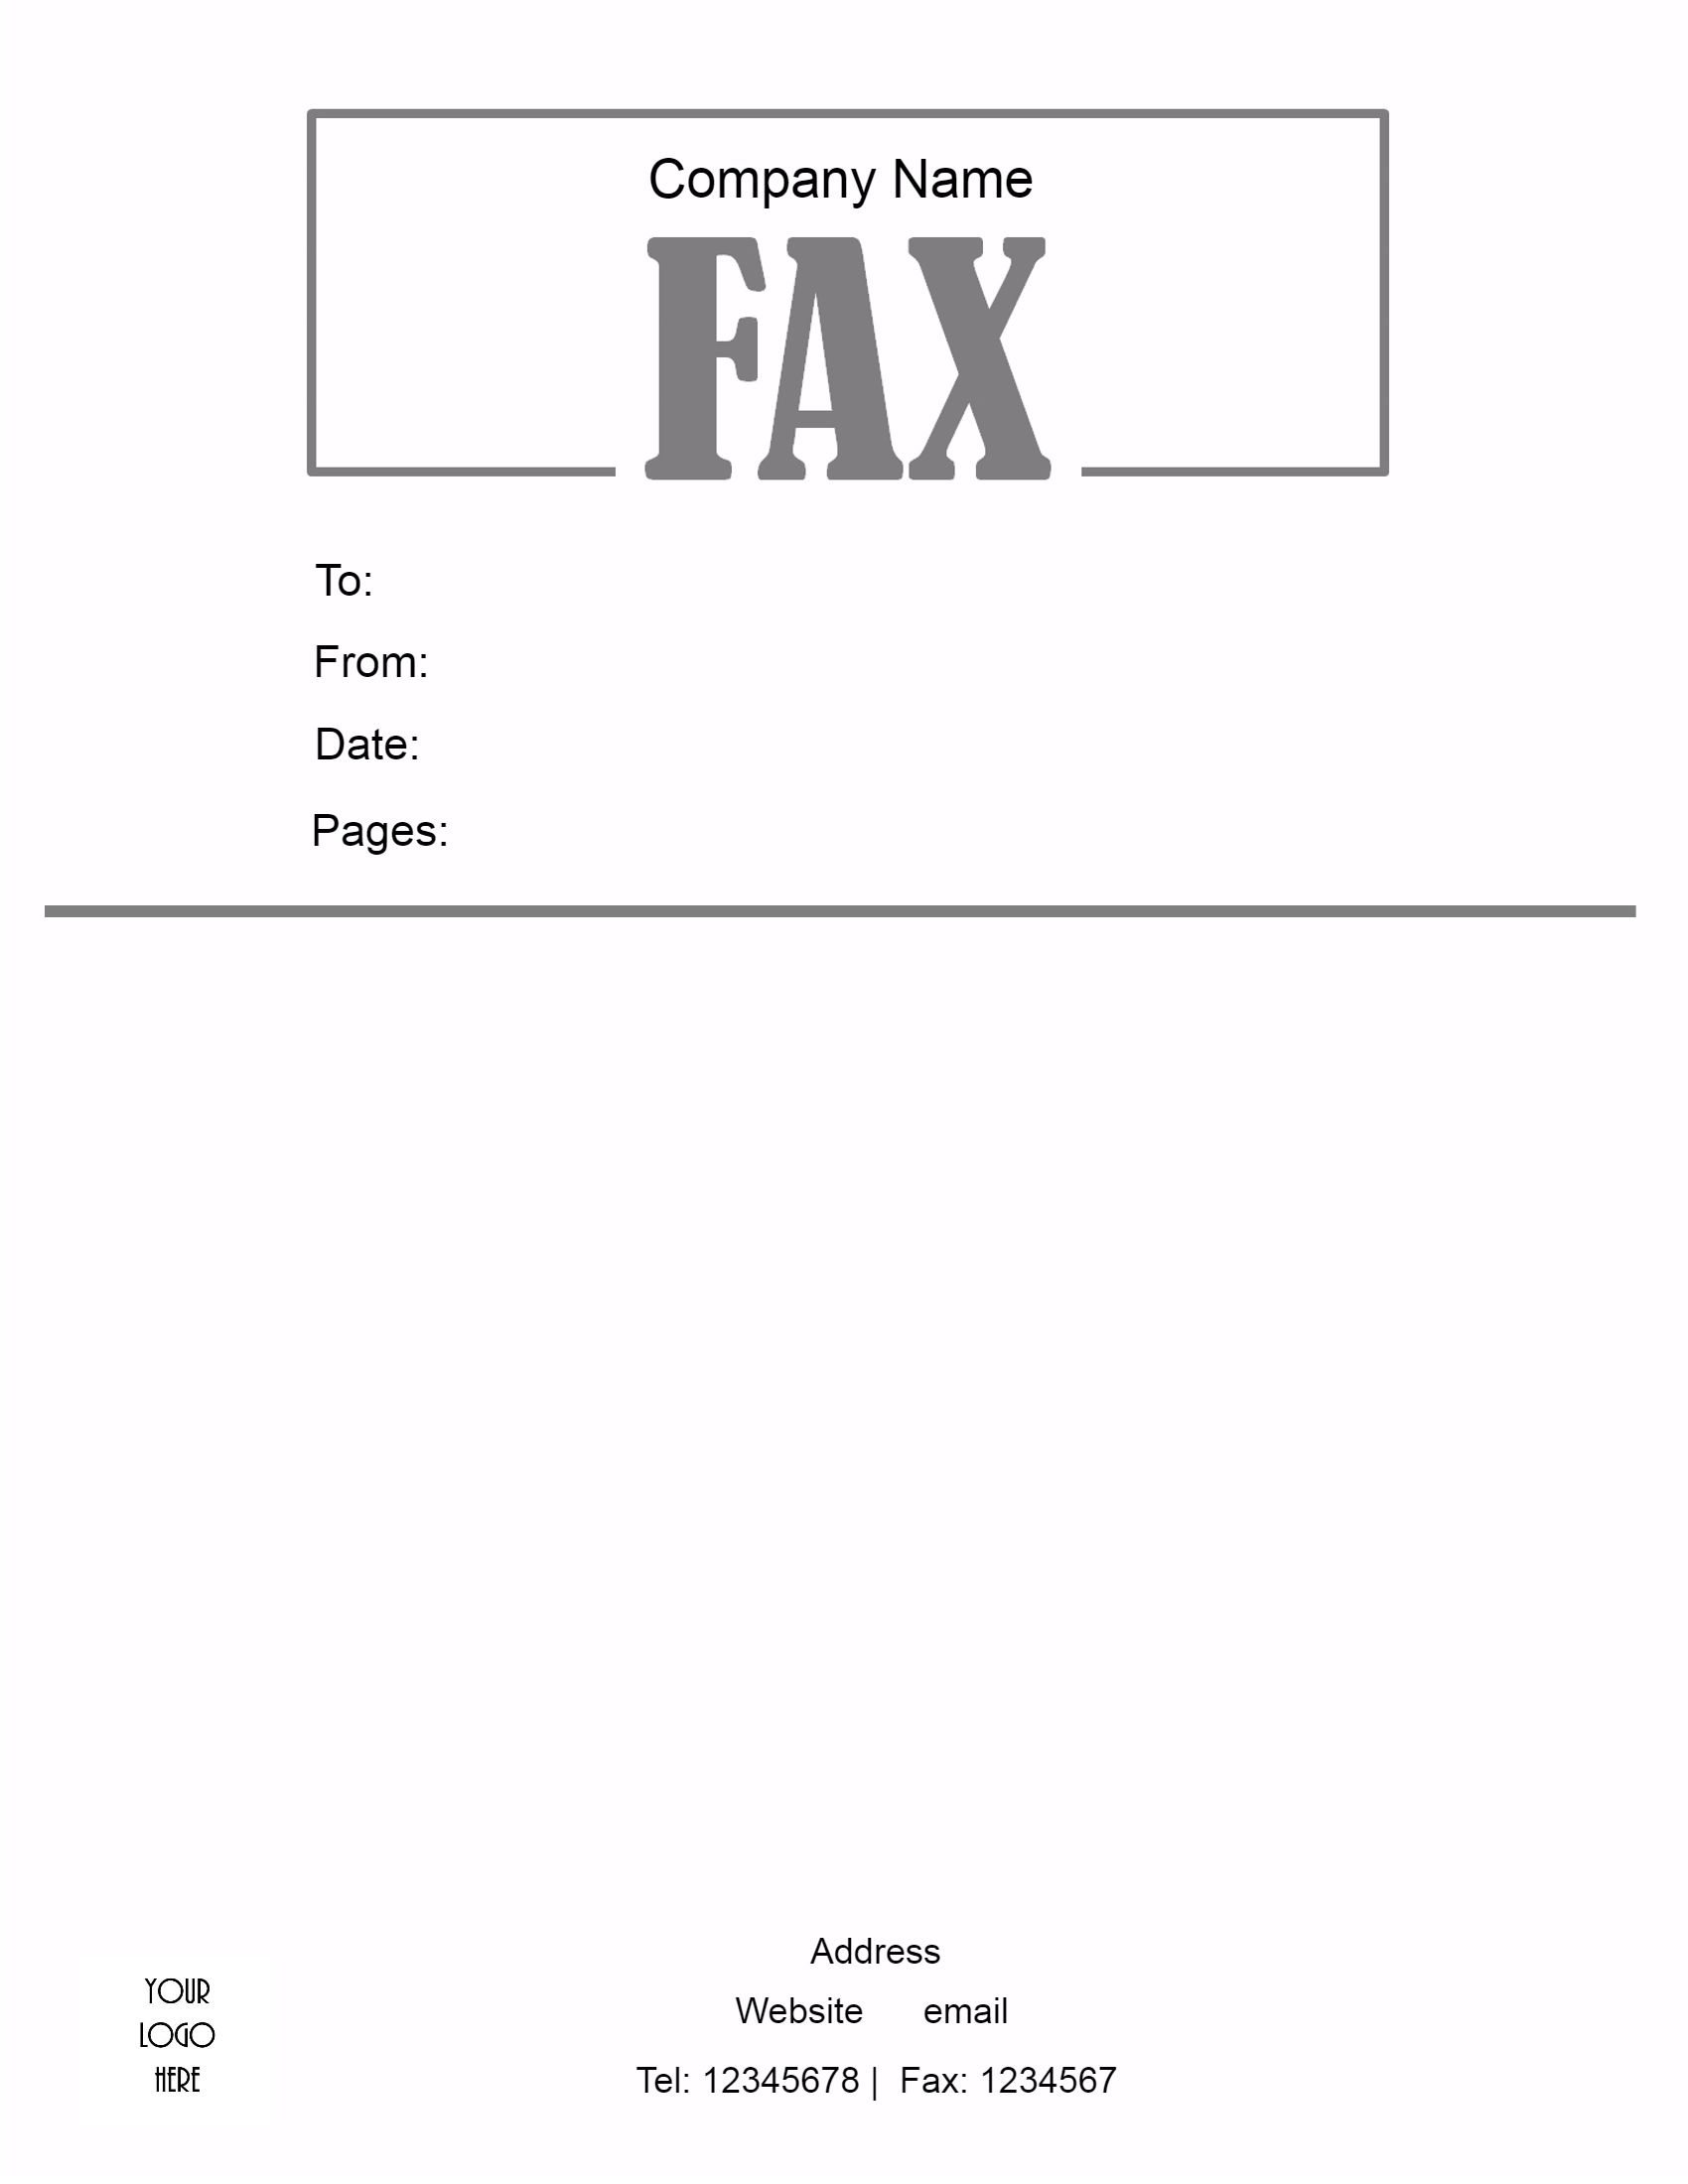 Free Fax Cover Sheet Template | Customize Online then Print